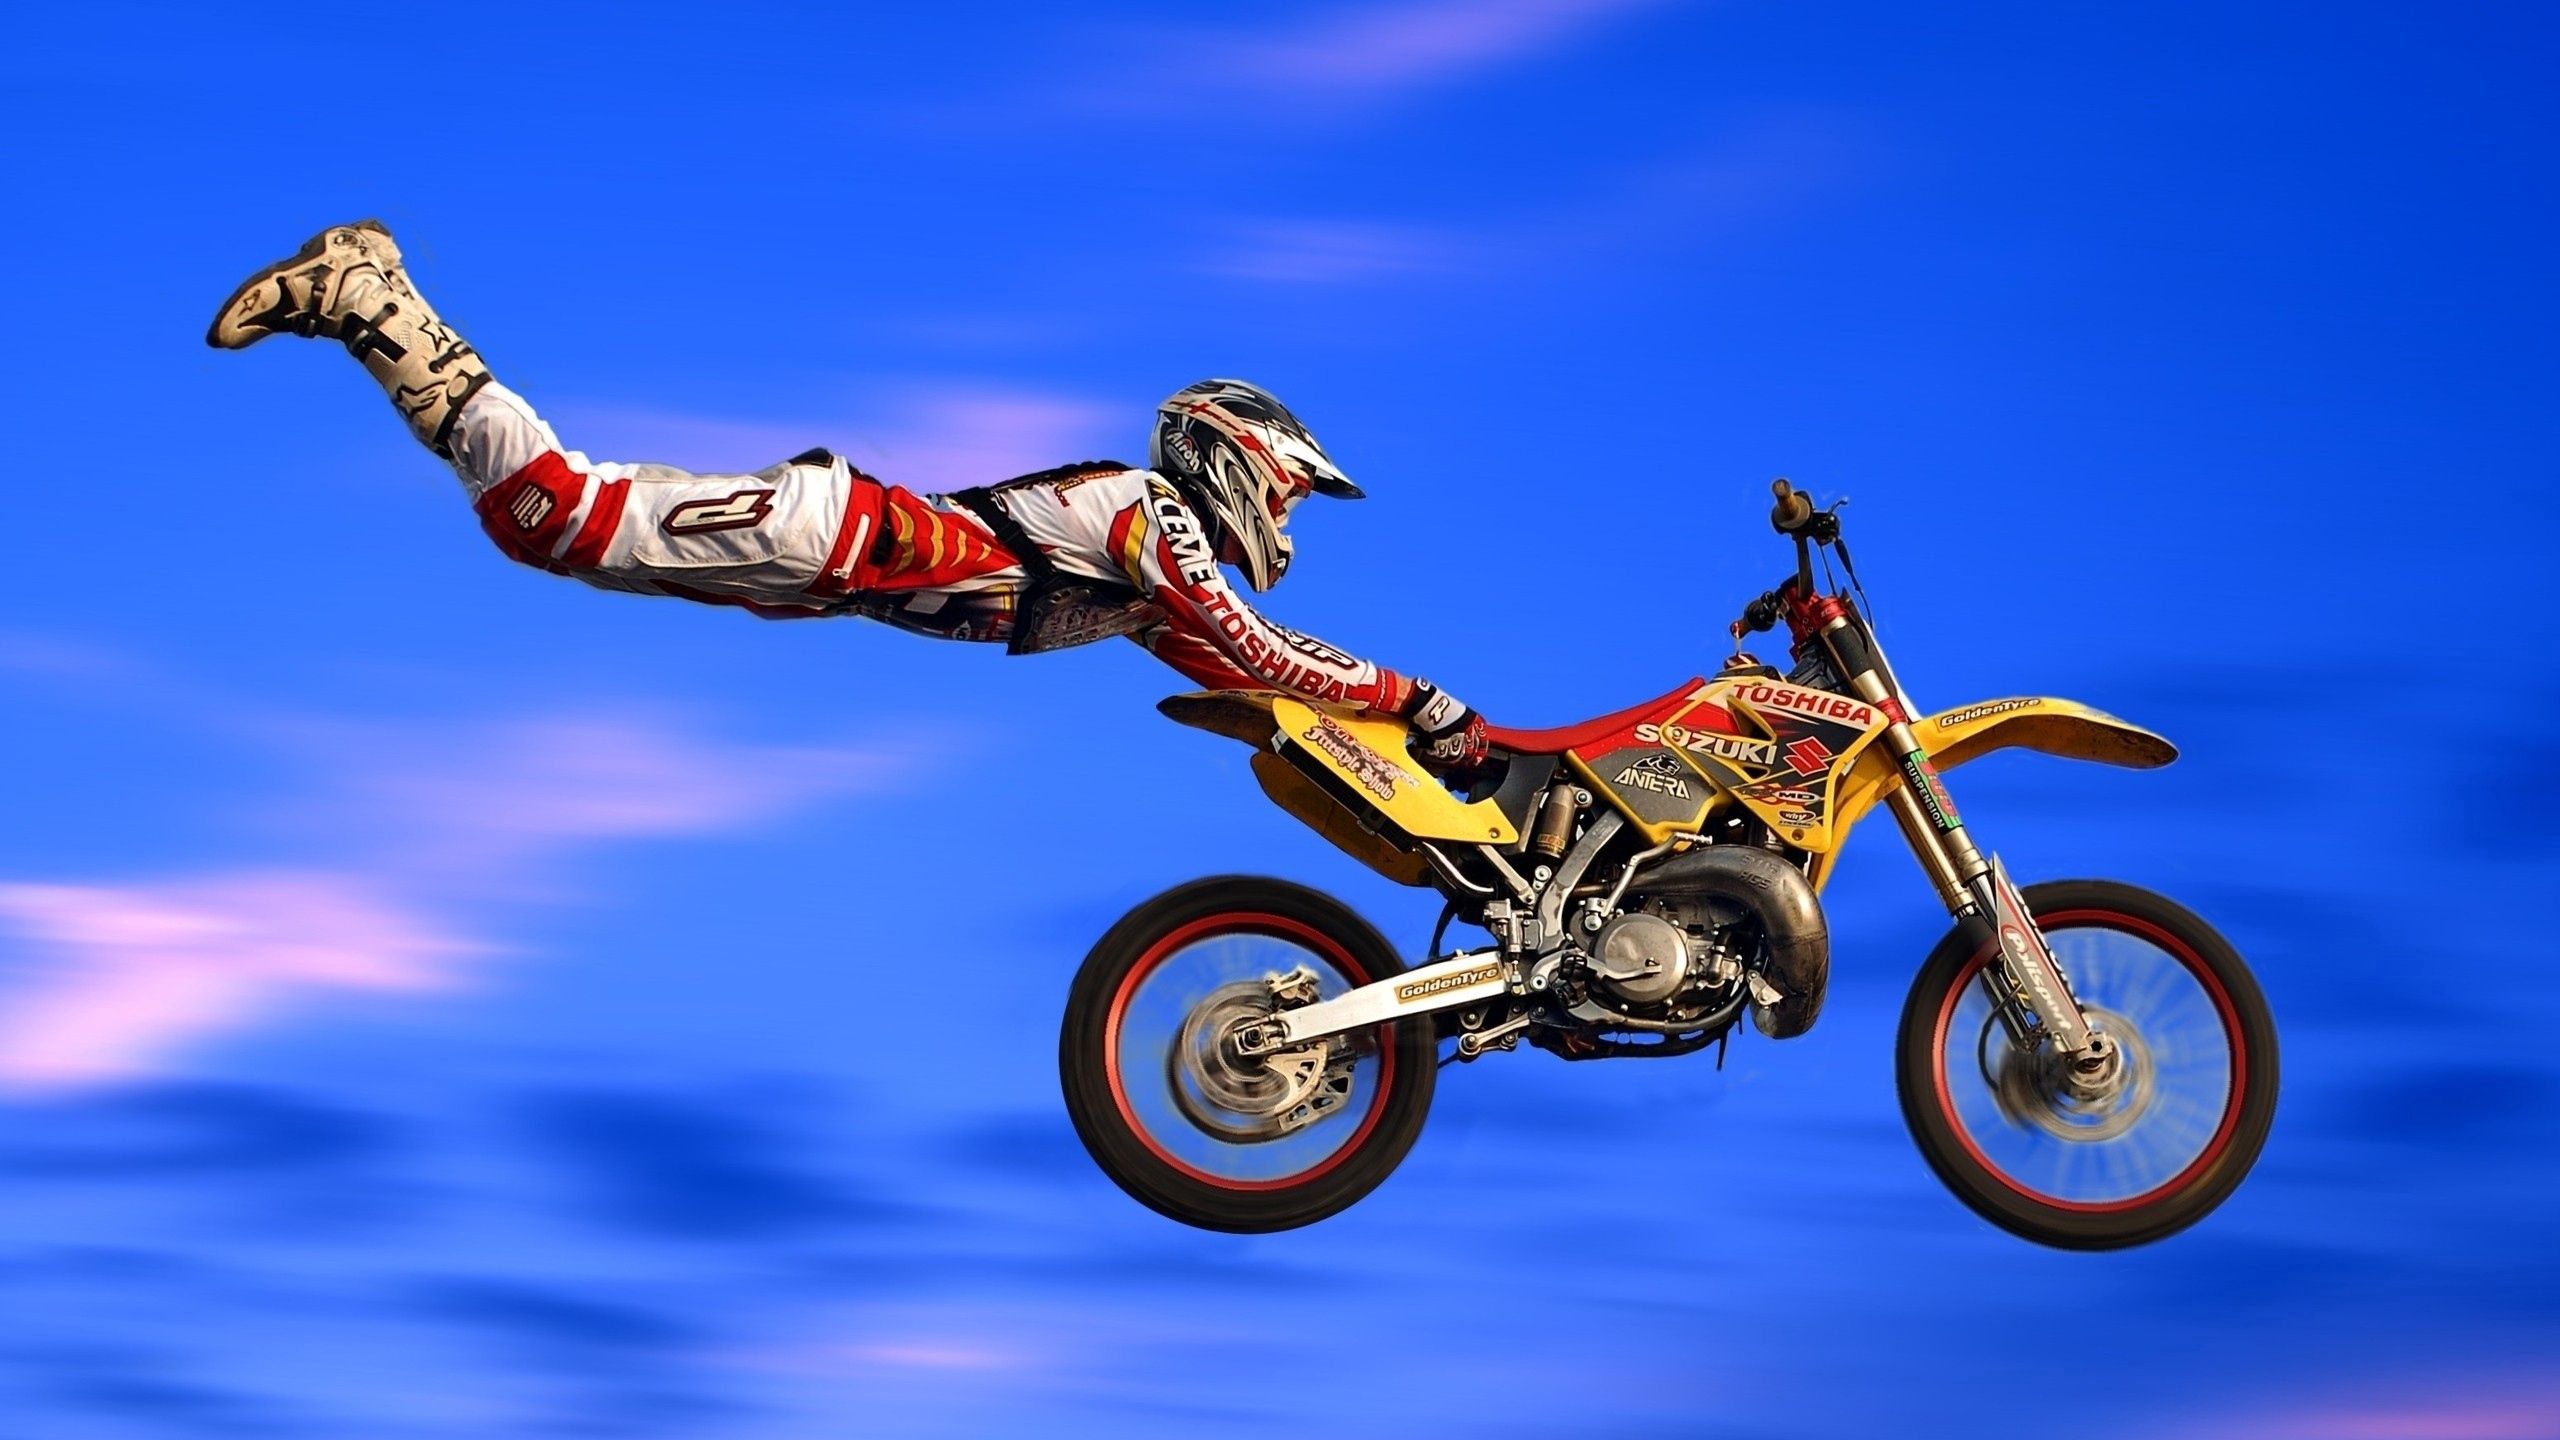 extreme, motorcycles, flight, motorcycle, bounce, jump, trick, costume, danger HD wallpaper